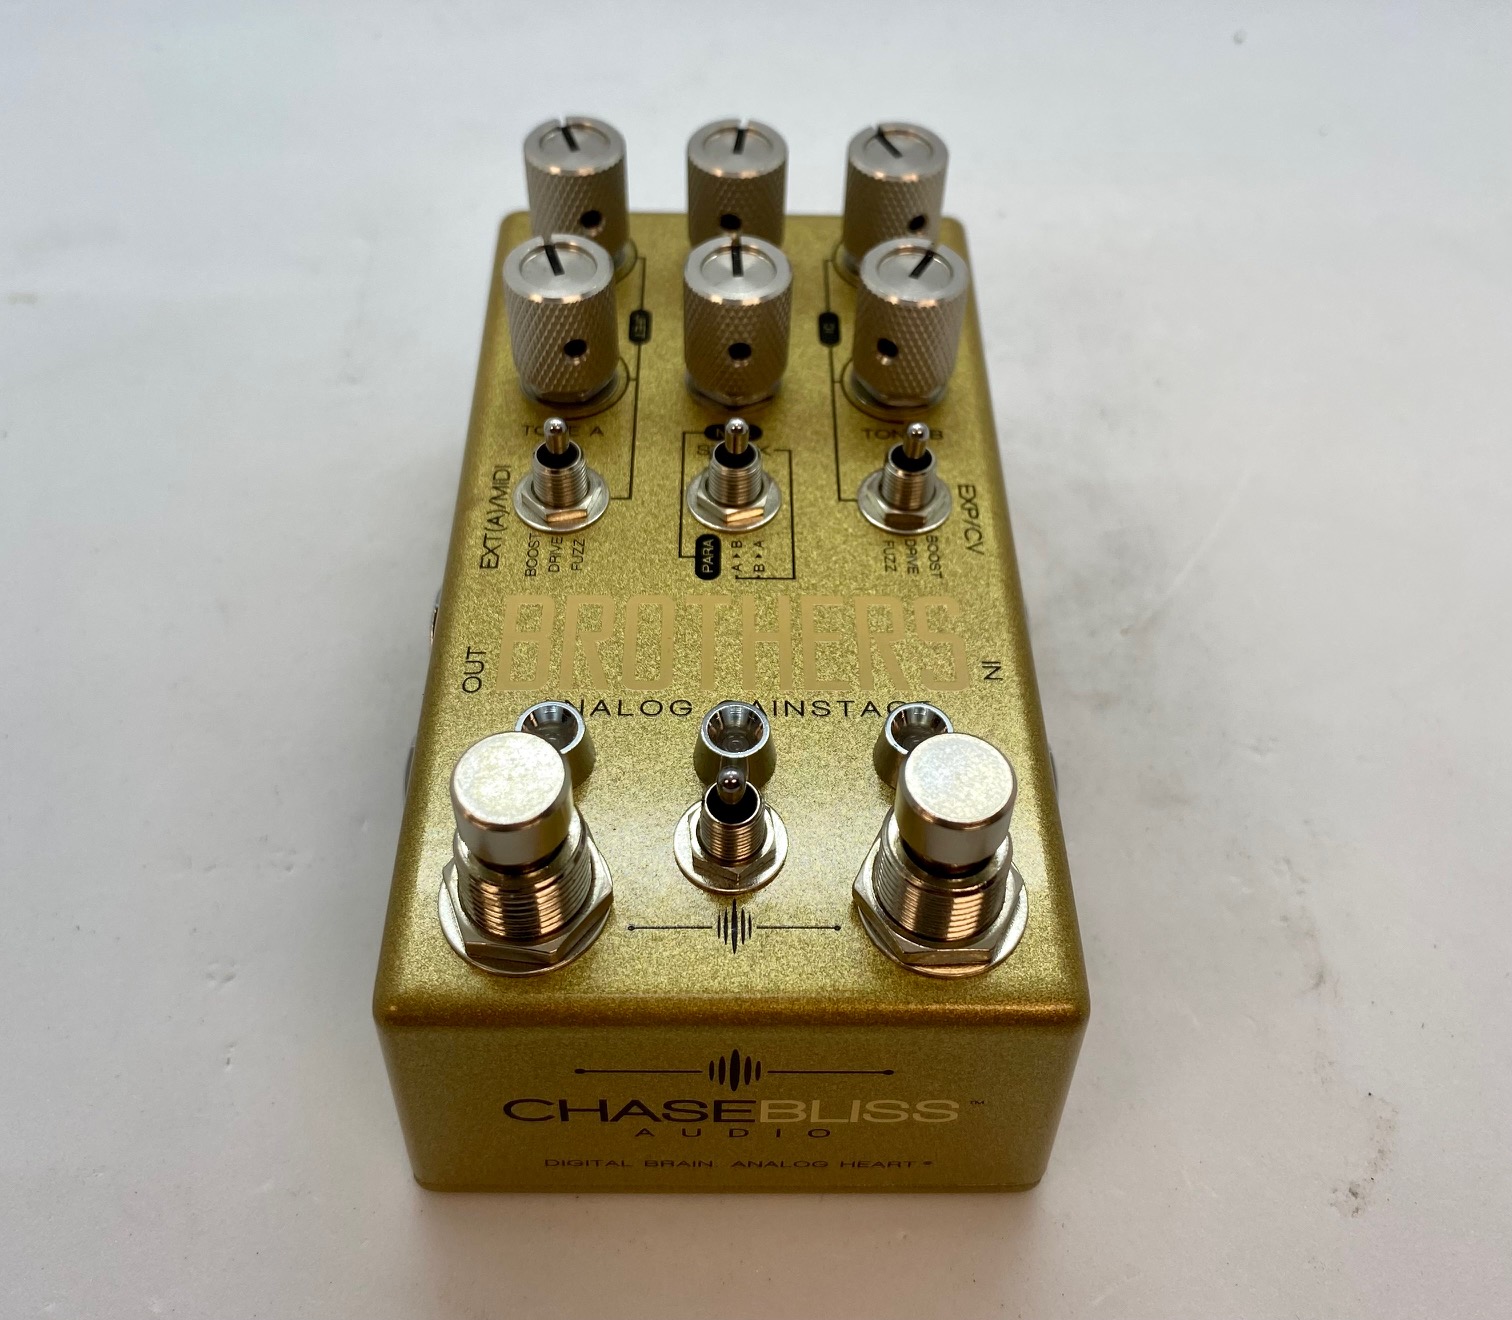 Surtido barro pobre Chase Bliss Audio Brothers Analog Gain Stage Pedal - Nickels Music